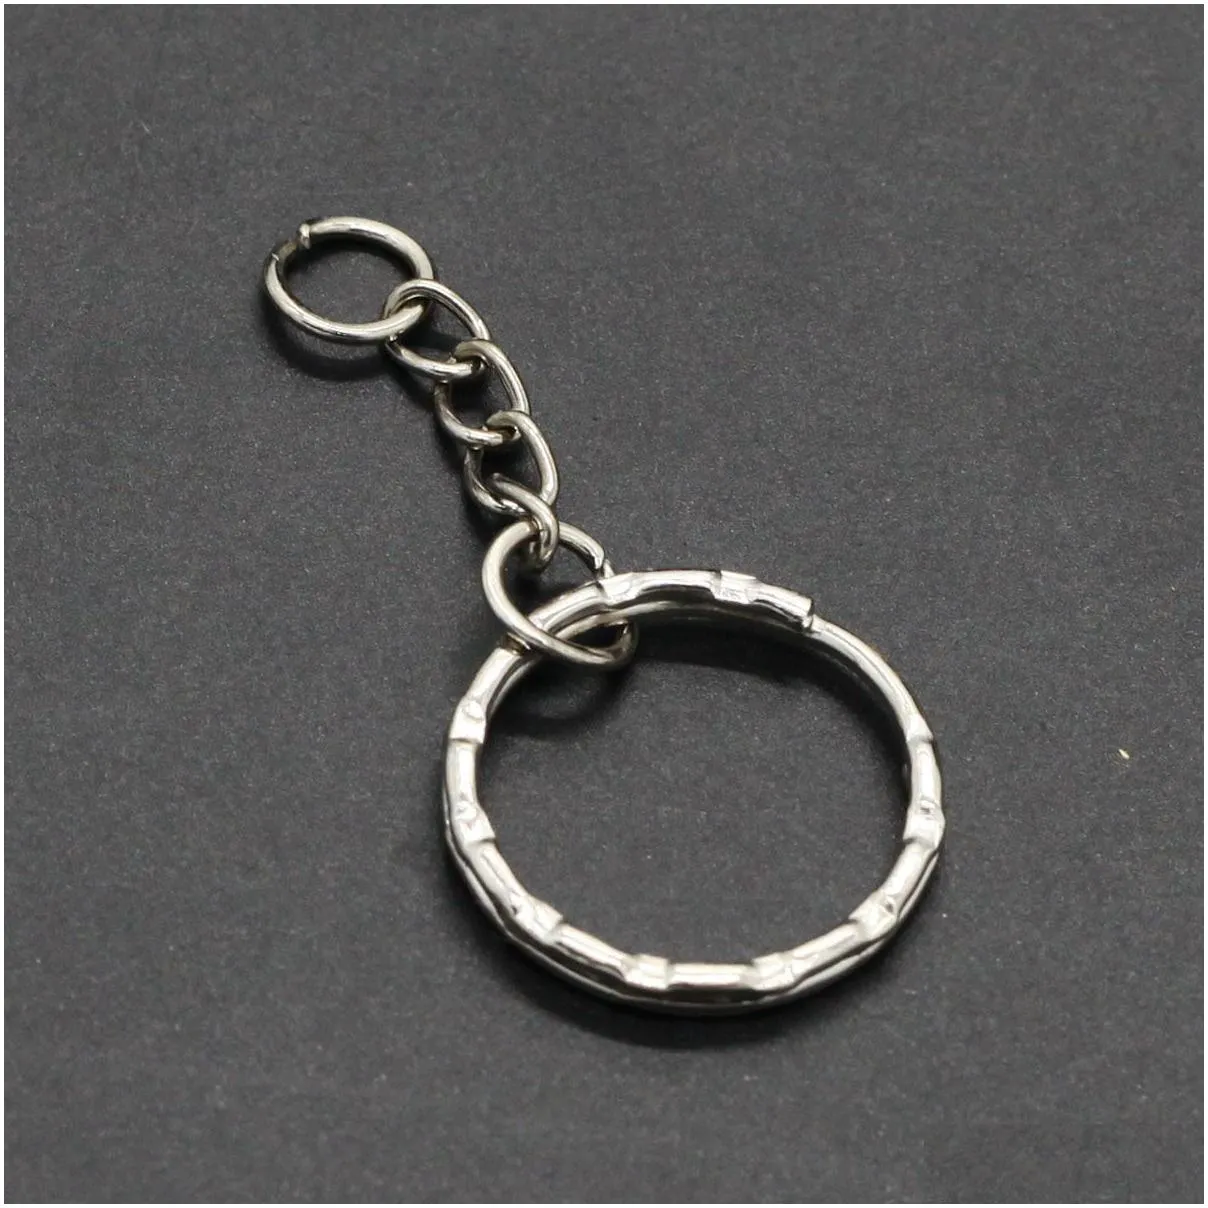  sell antique silver band chain key ring diy accessories material accessories